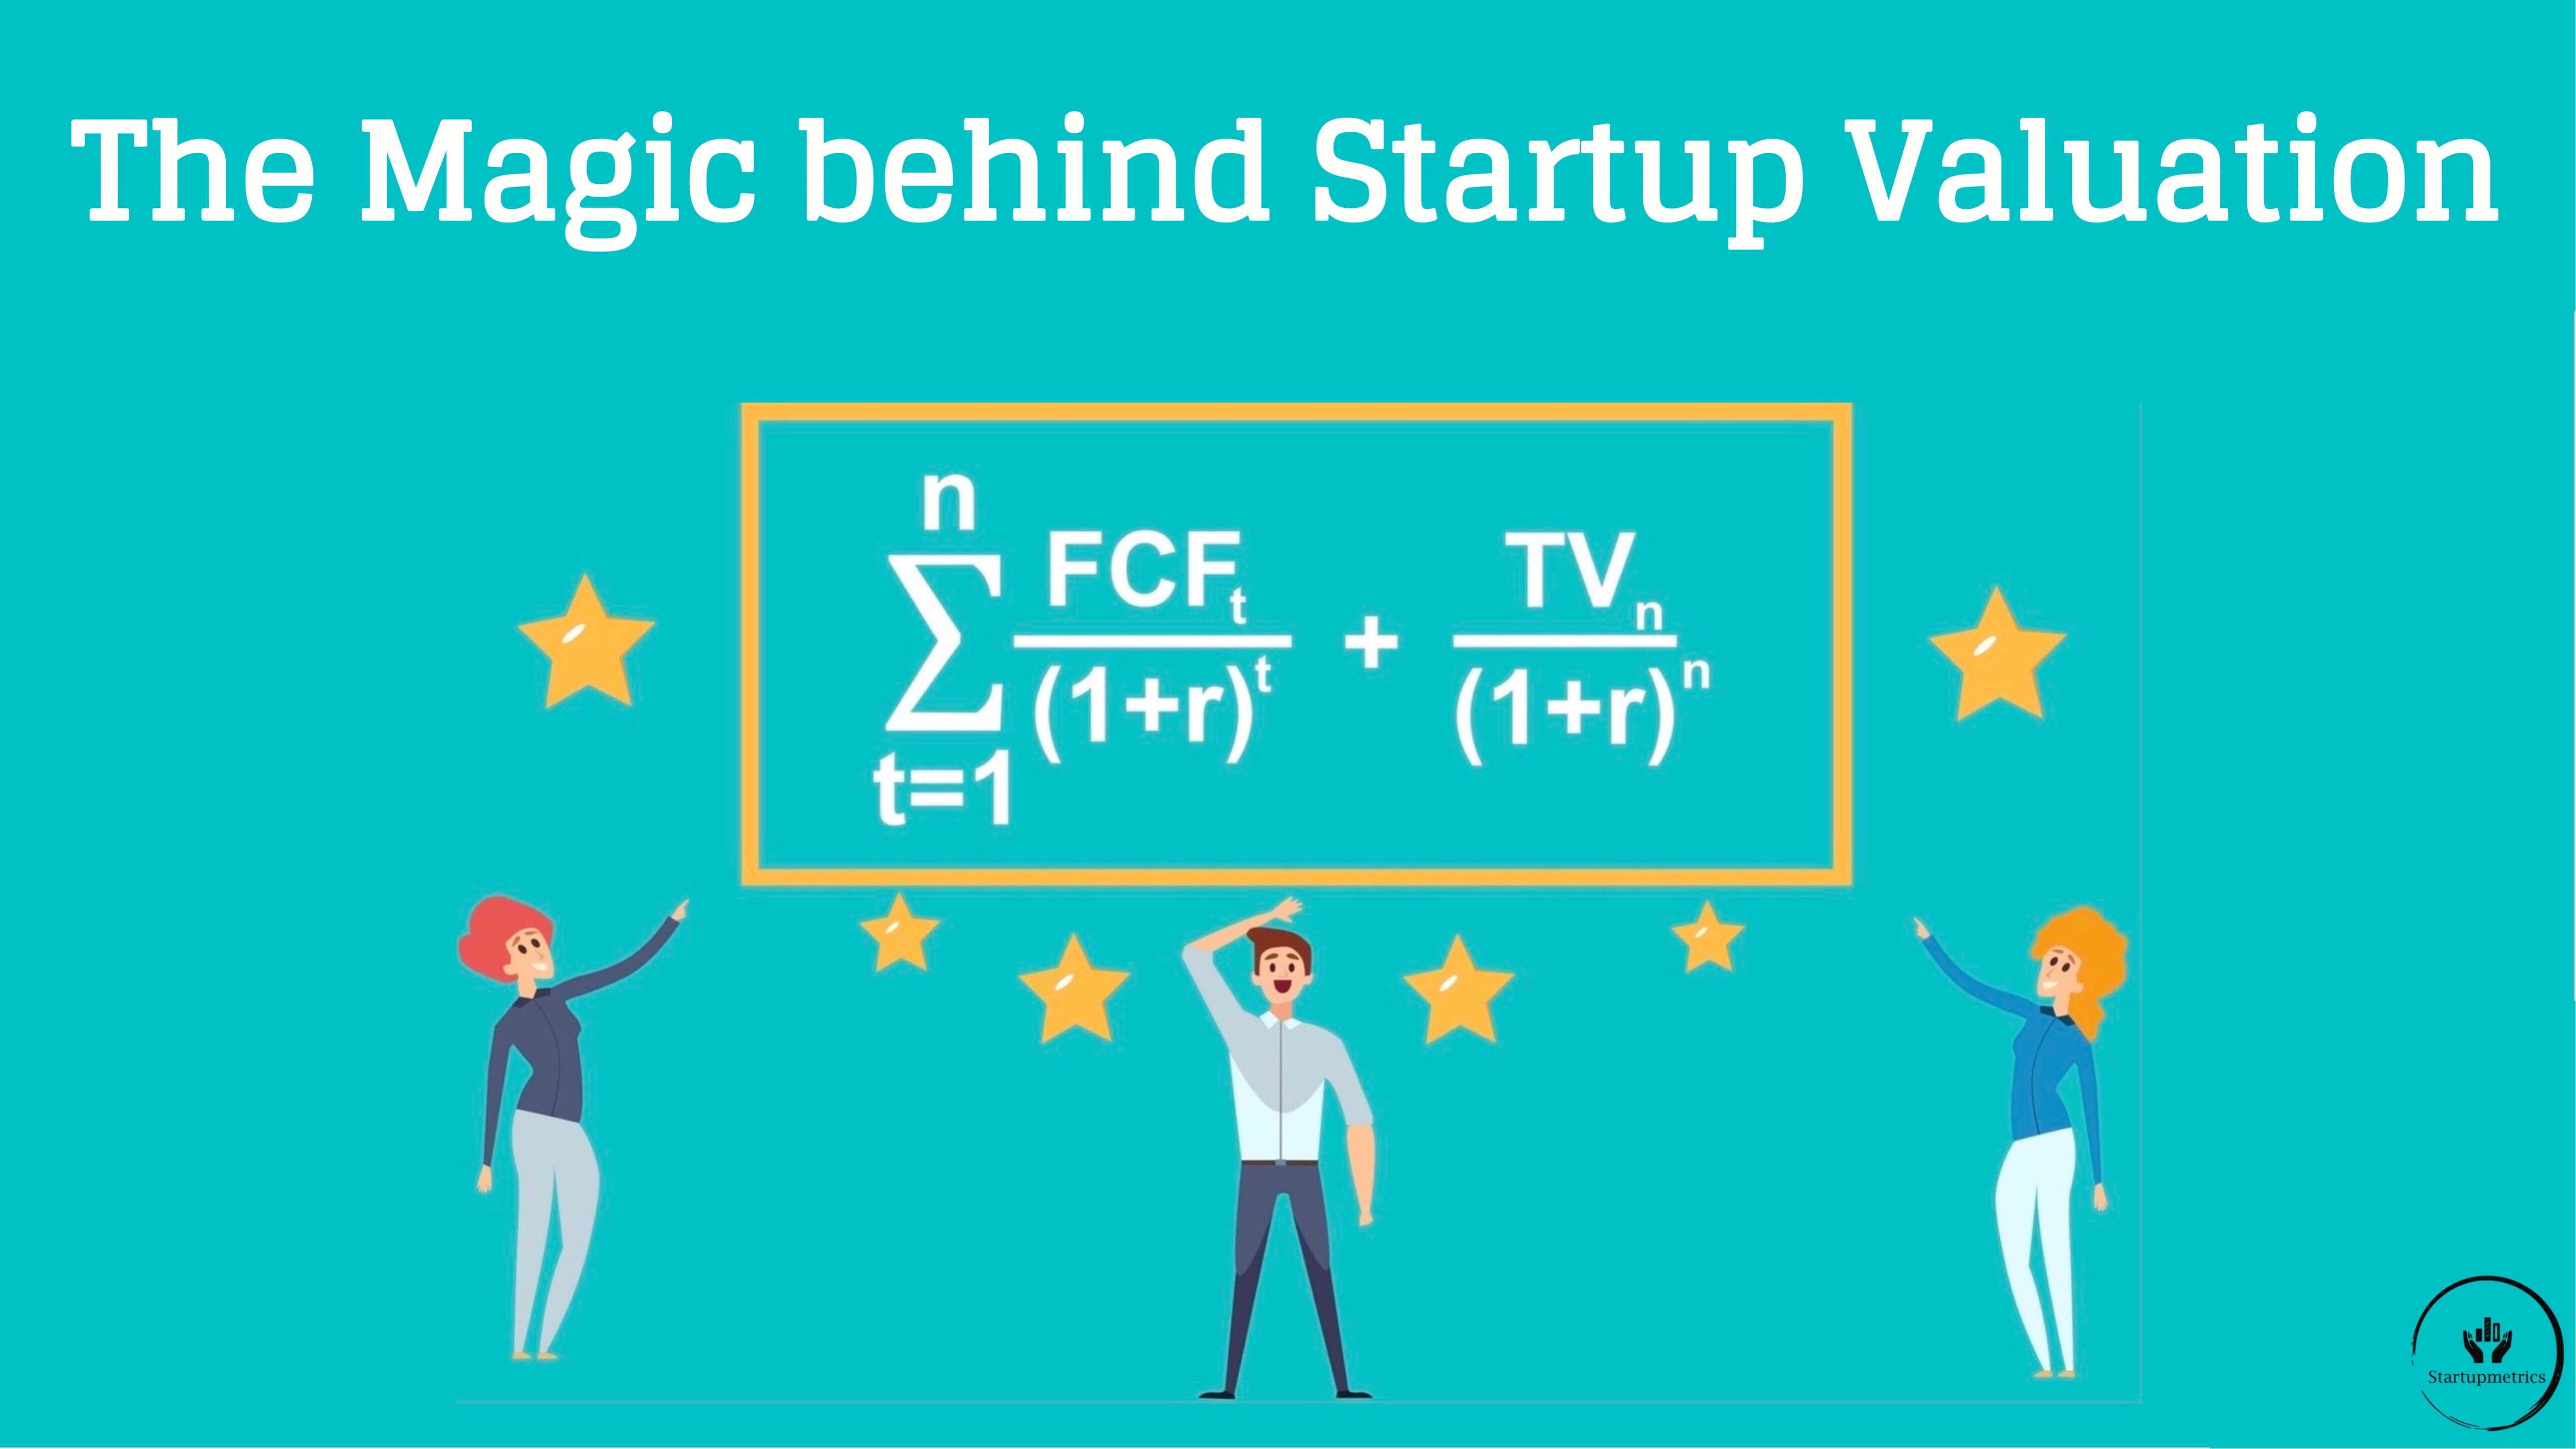 What determines the fair value of your startup and how can you objectively defend your valuation in transactions?